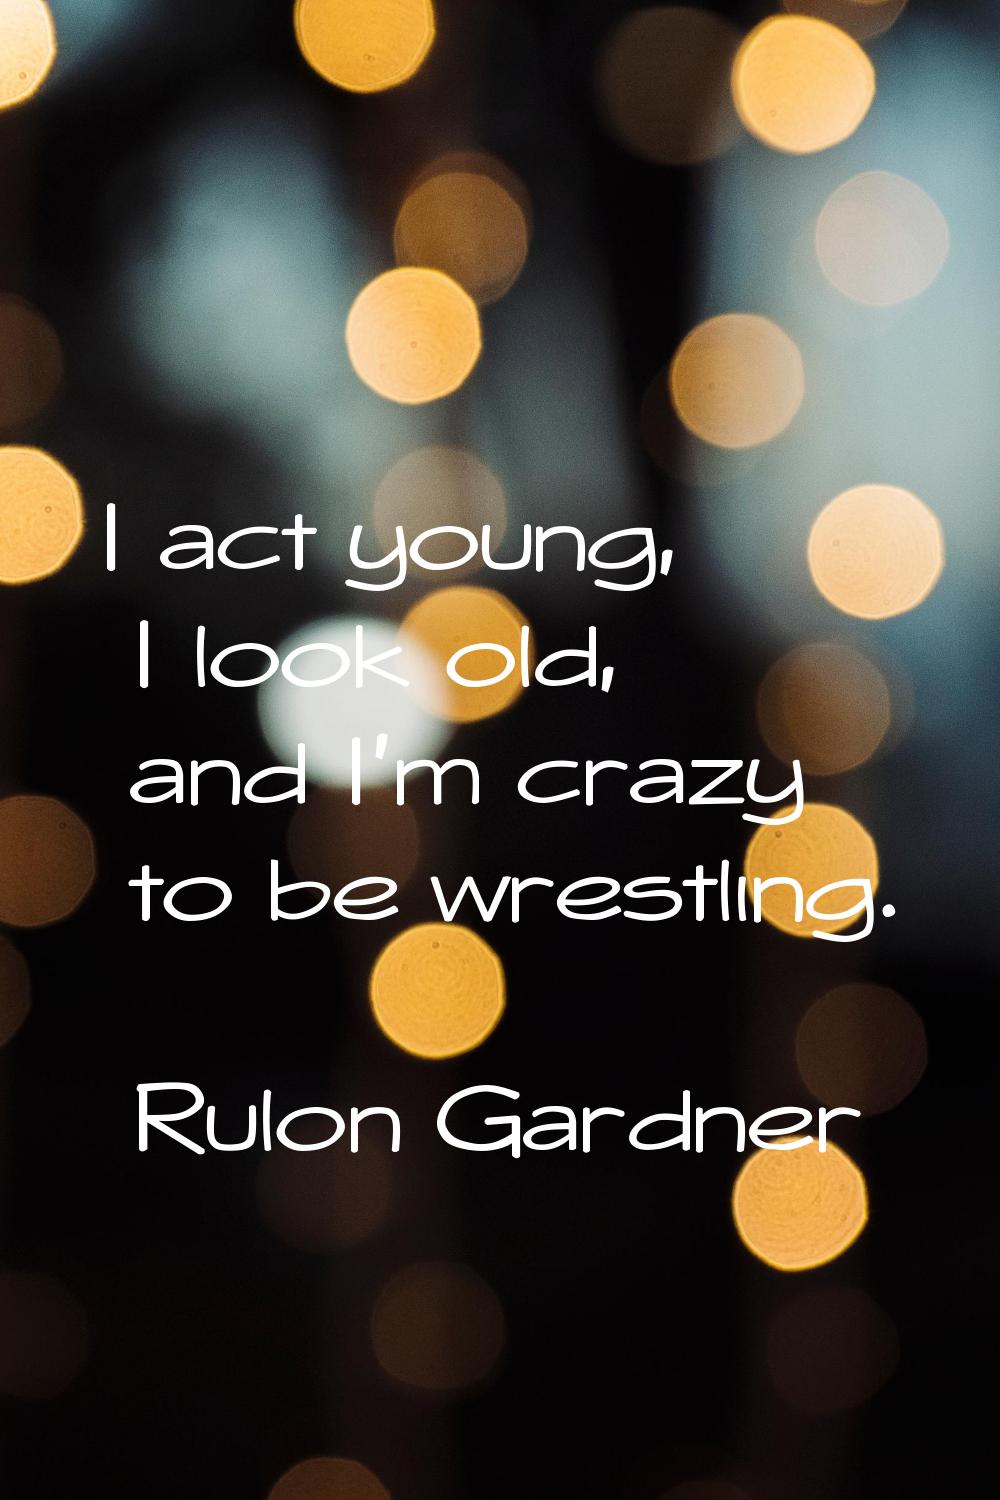 I act young, I look old, and I'm crazy to be wrestling.